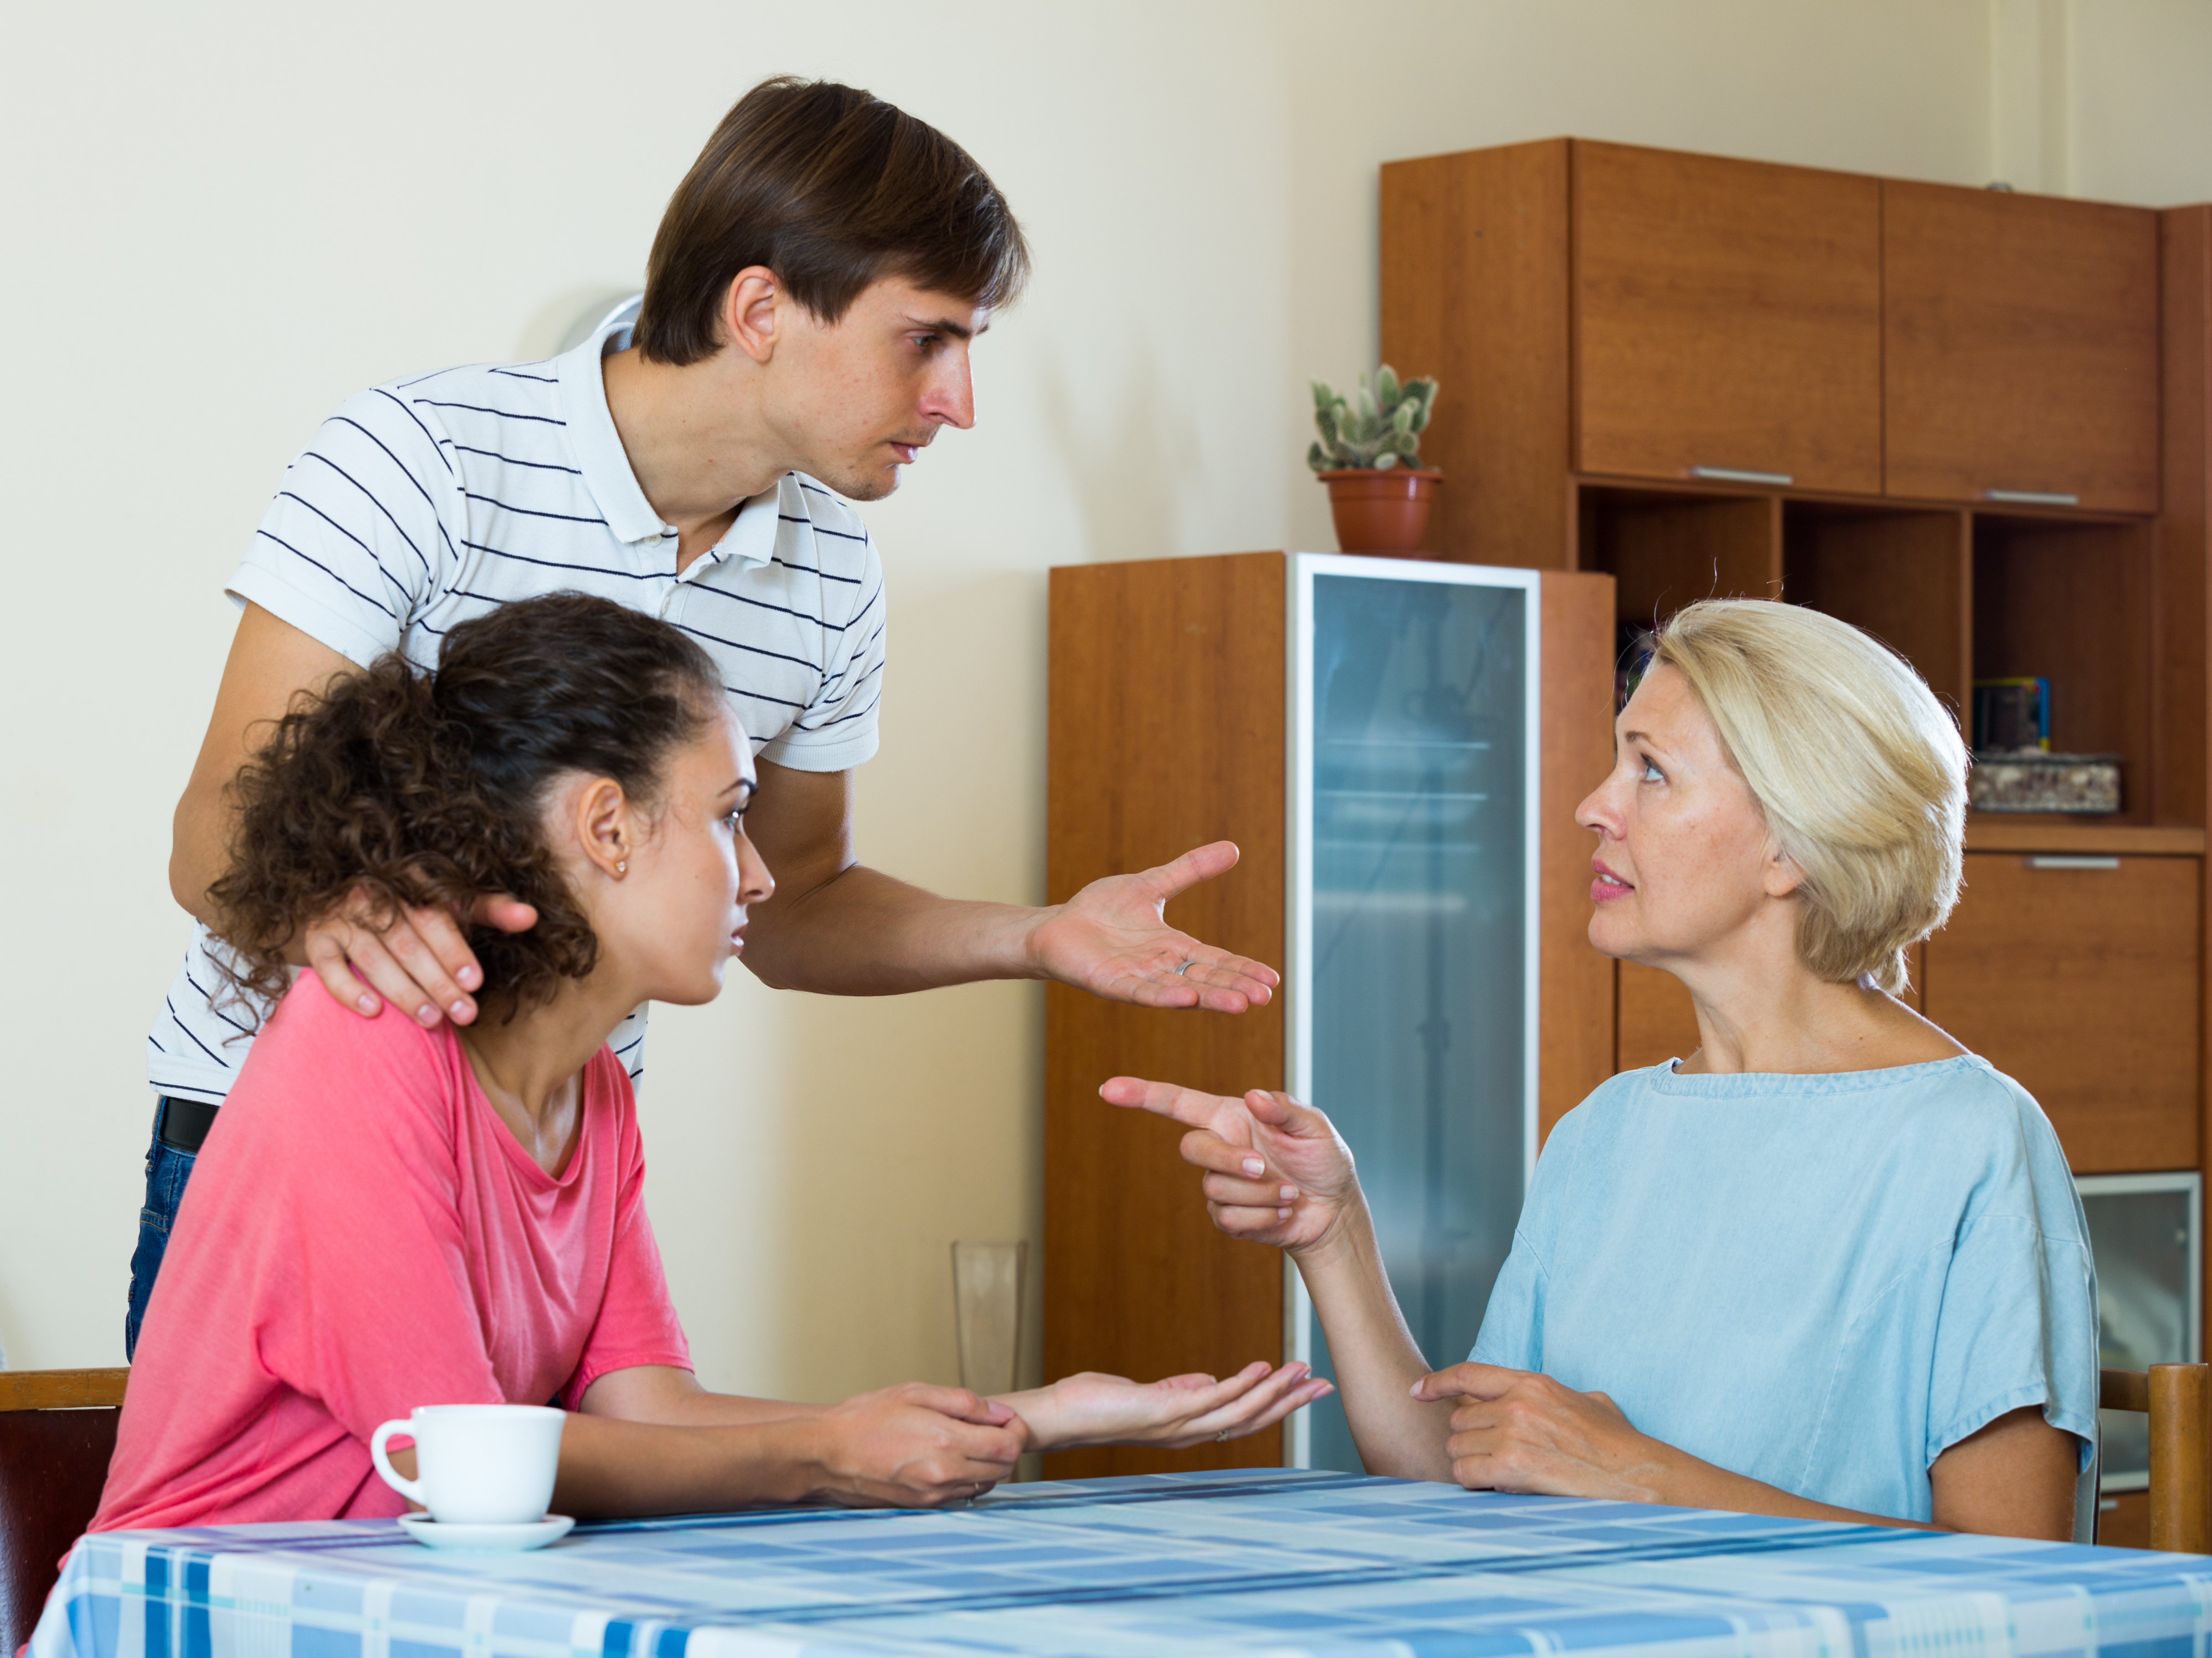 A young couple talking to an older woman | Source: Shutterstock